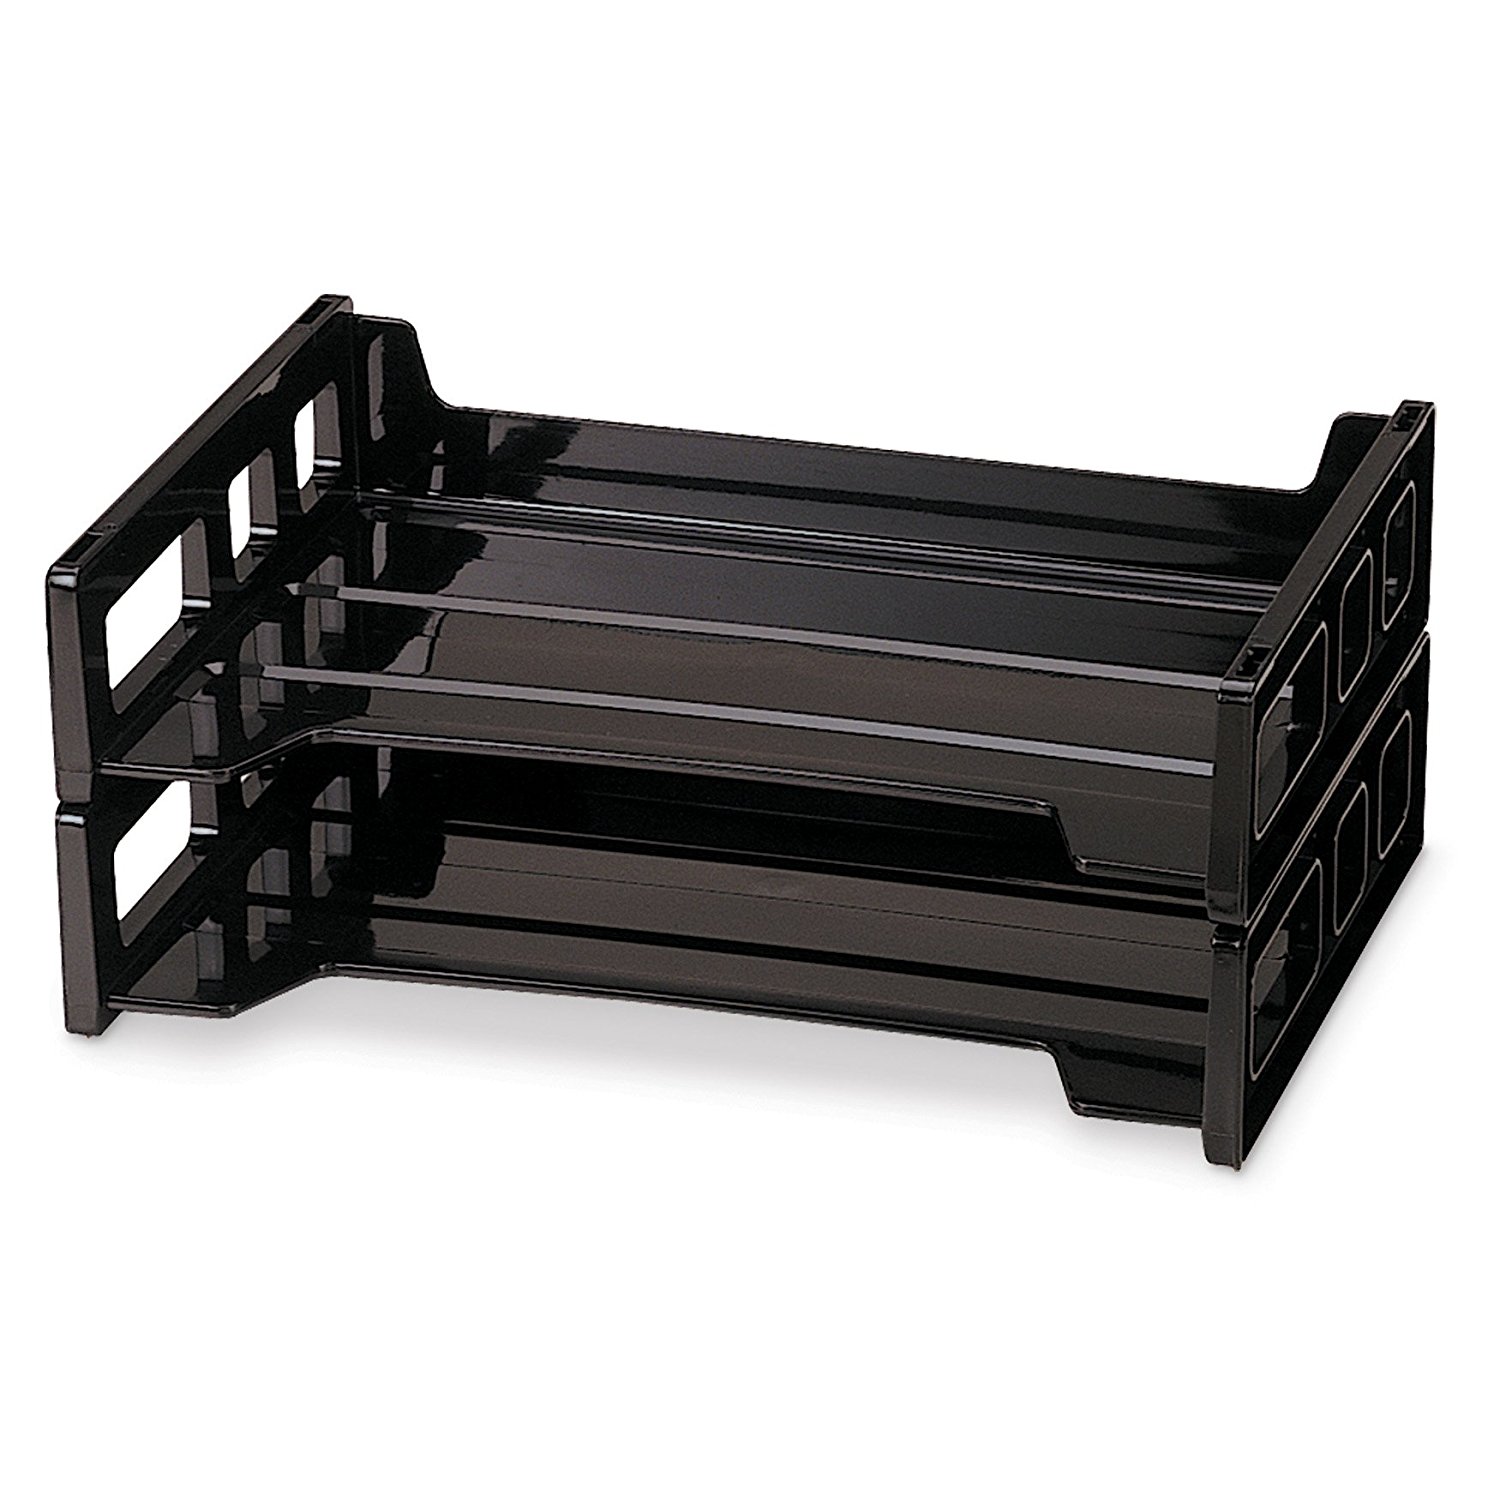 Side loading, letter size desk trays stack securely to form an attractive, convenient method of desktop organization